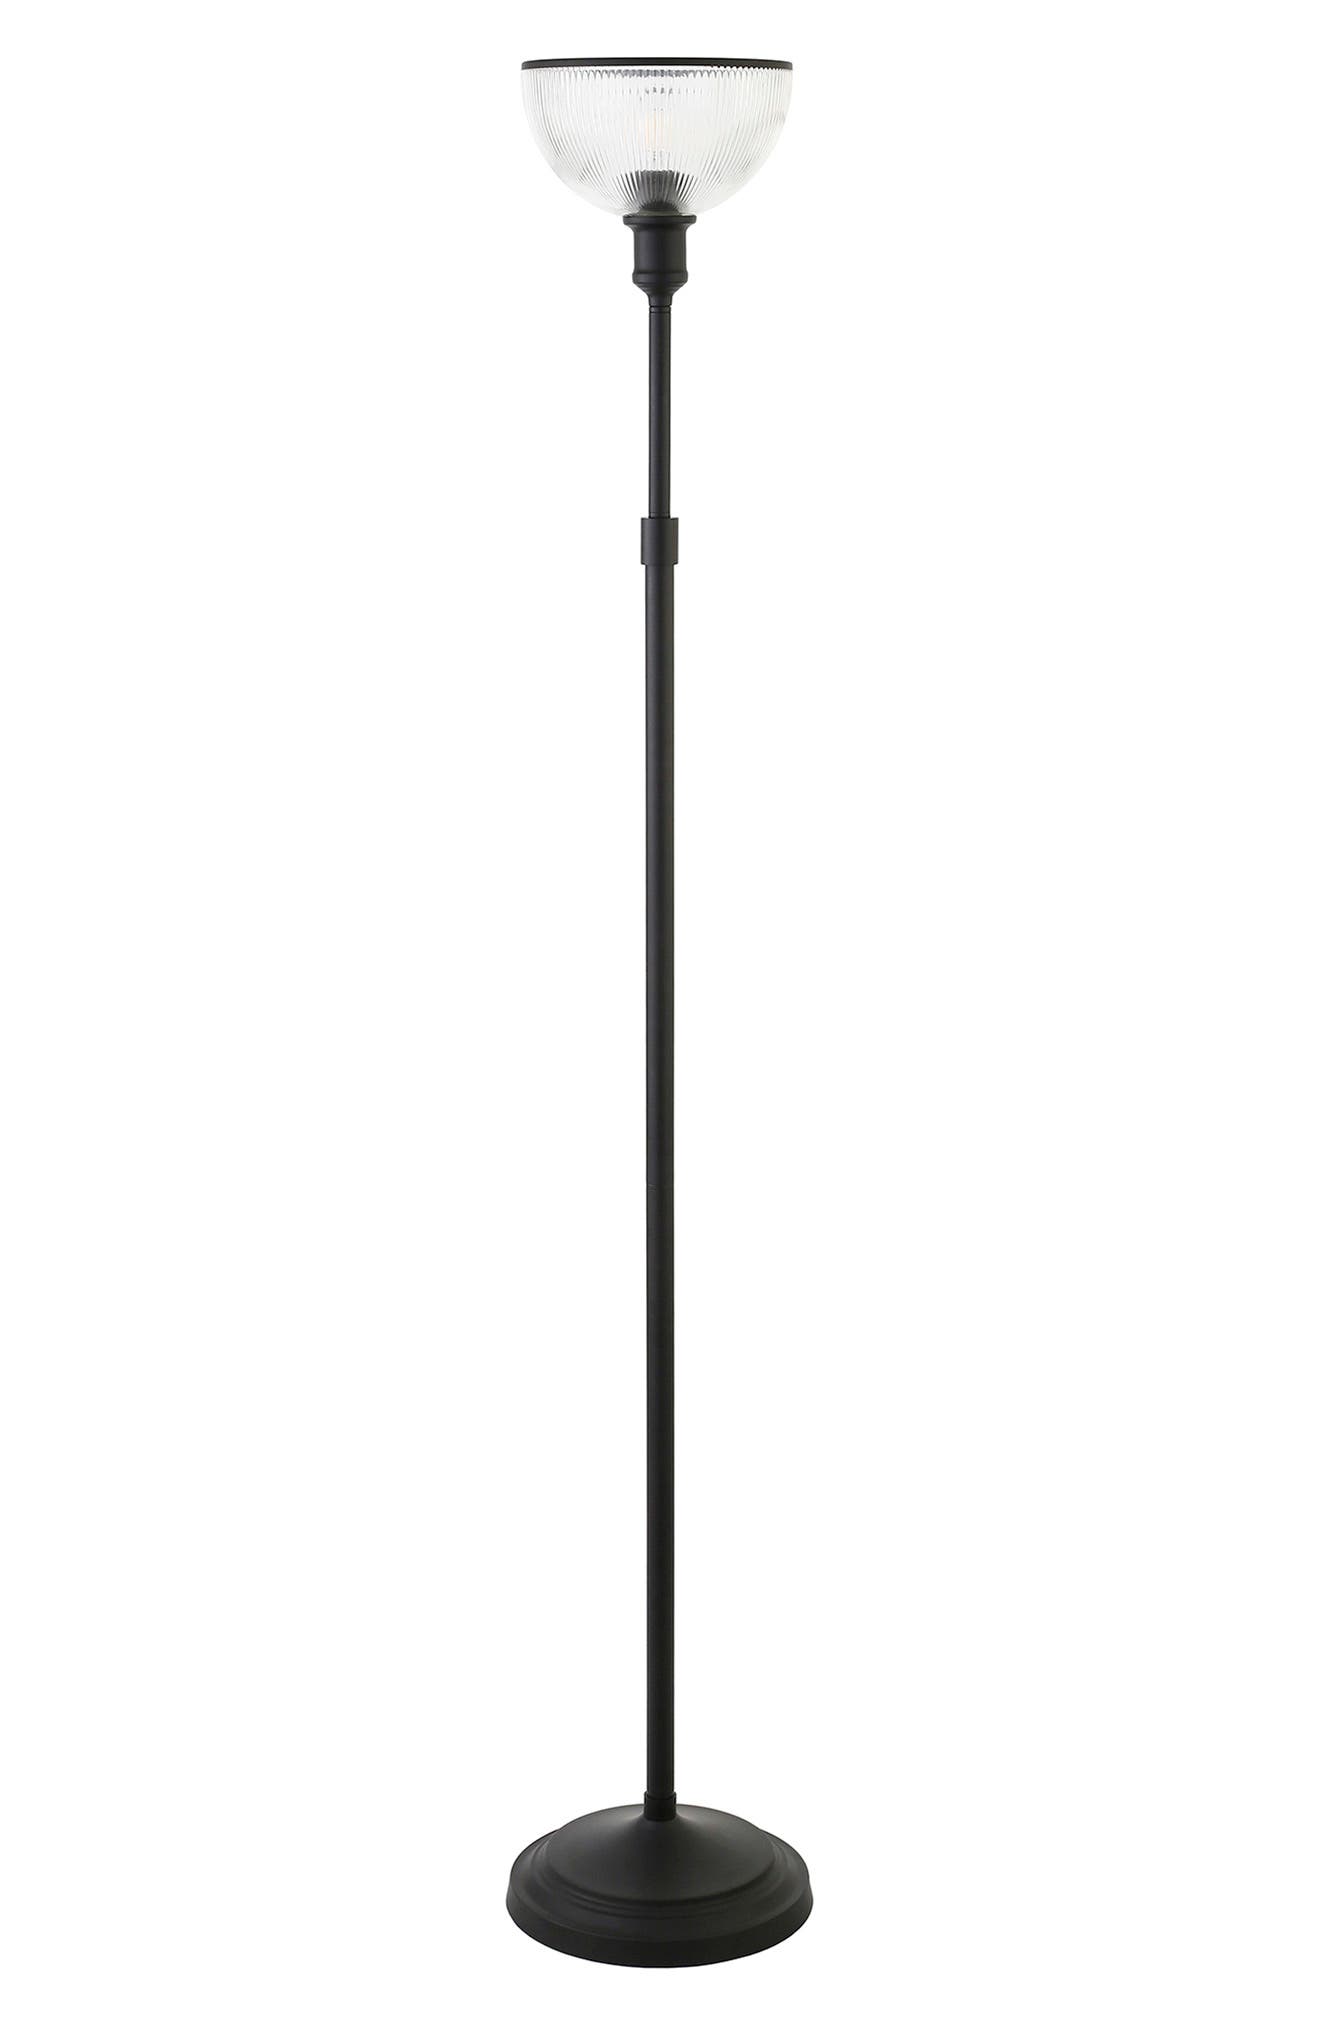 HUDSON & CANAL FRANCIS BLACKENED BRONZE TORCHIERE FLOOR LAMP,810325039025